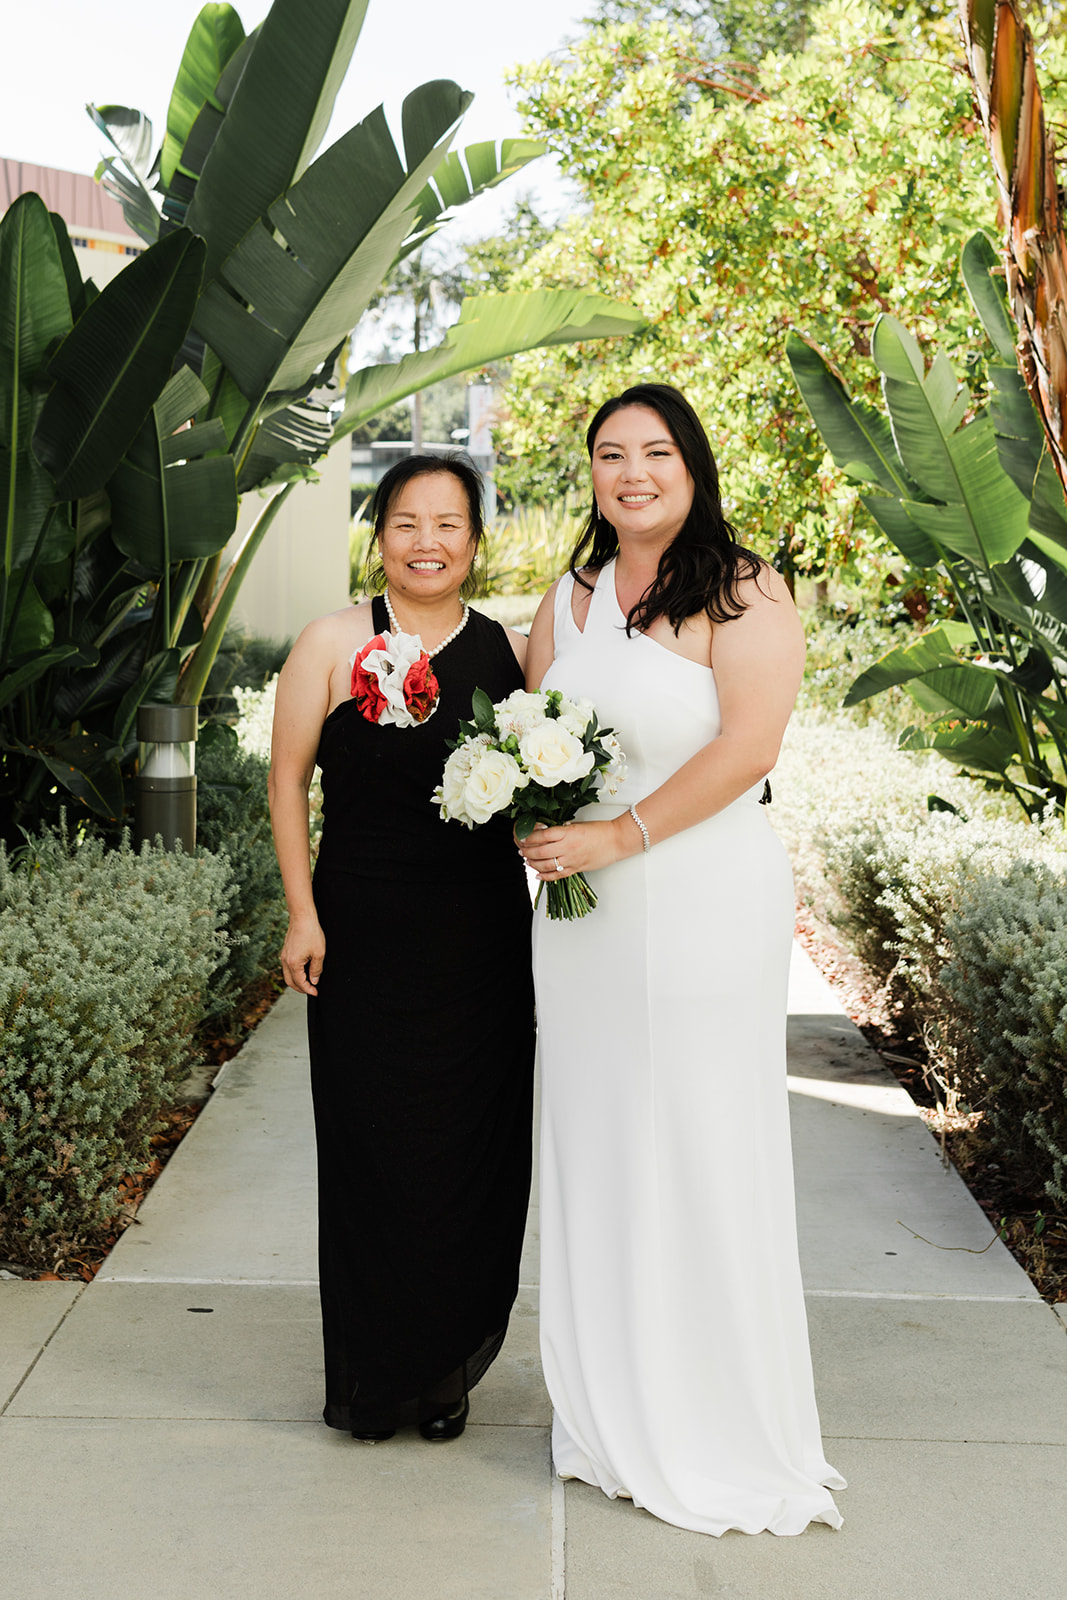 Gorgeous family wedding portaits at a couples Beverly Hills City Hall elopement